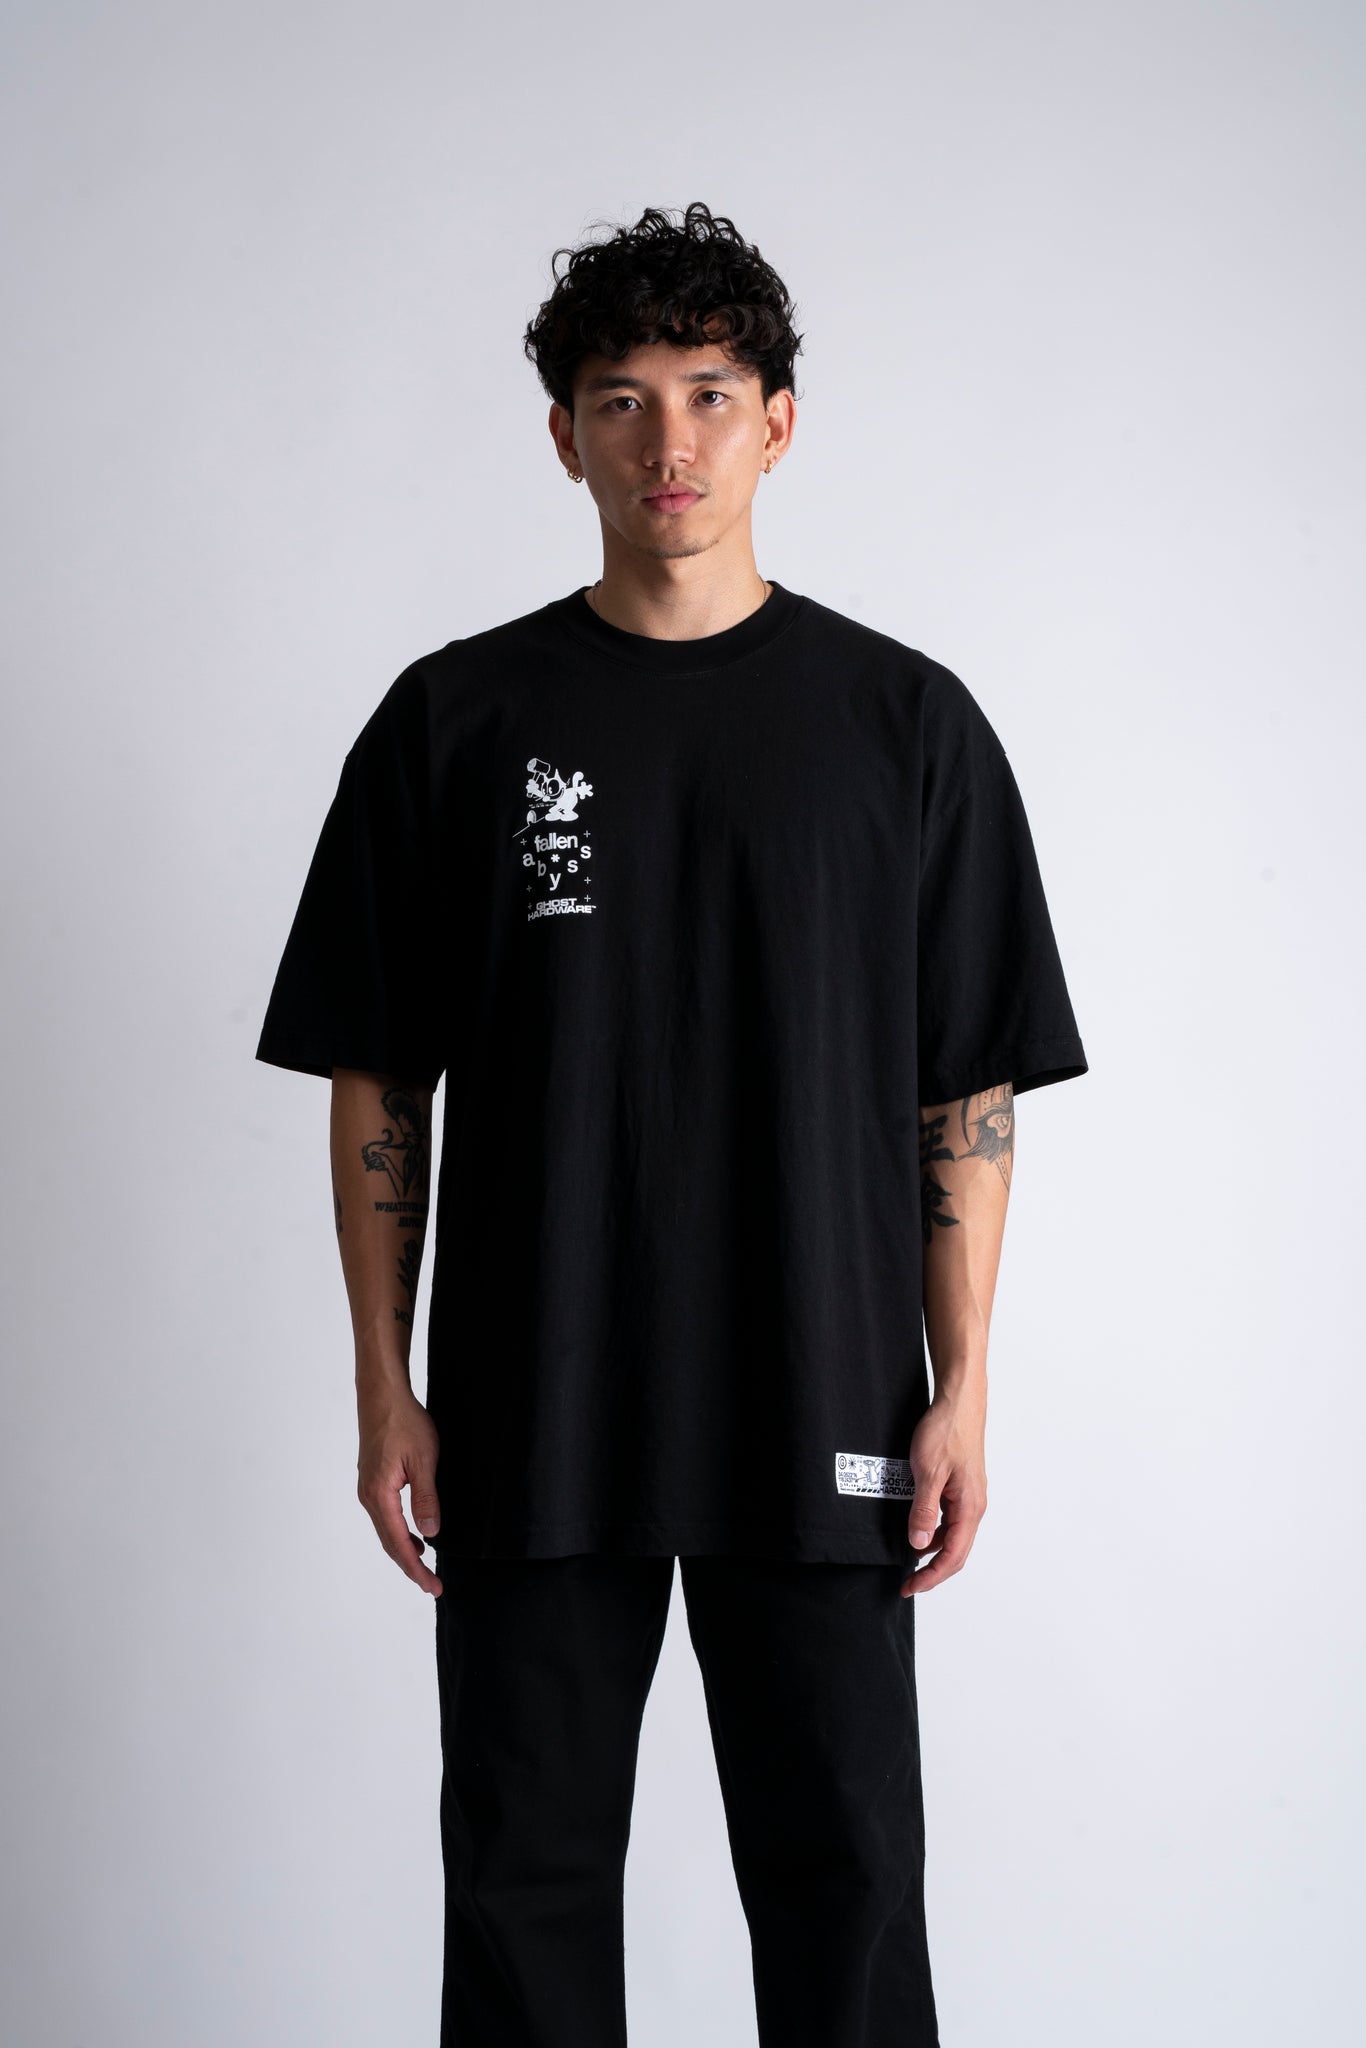 Rip-It 3.0 [ patch ] Tee